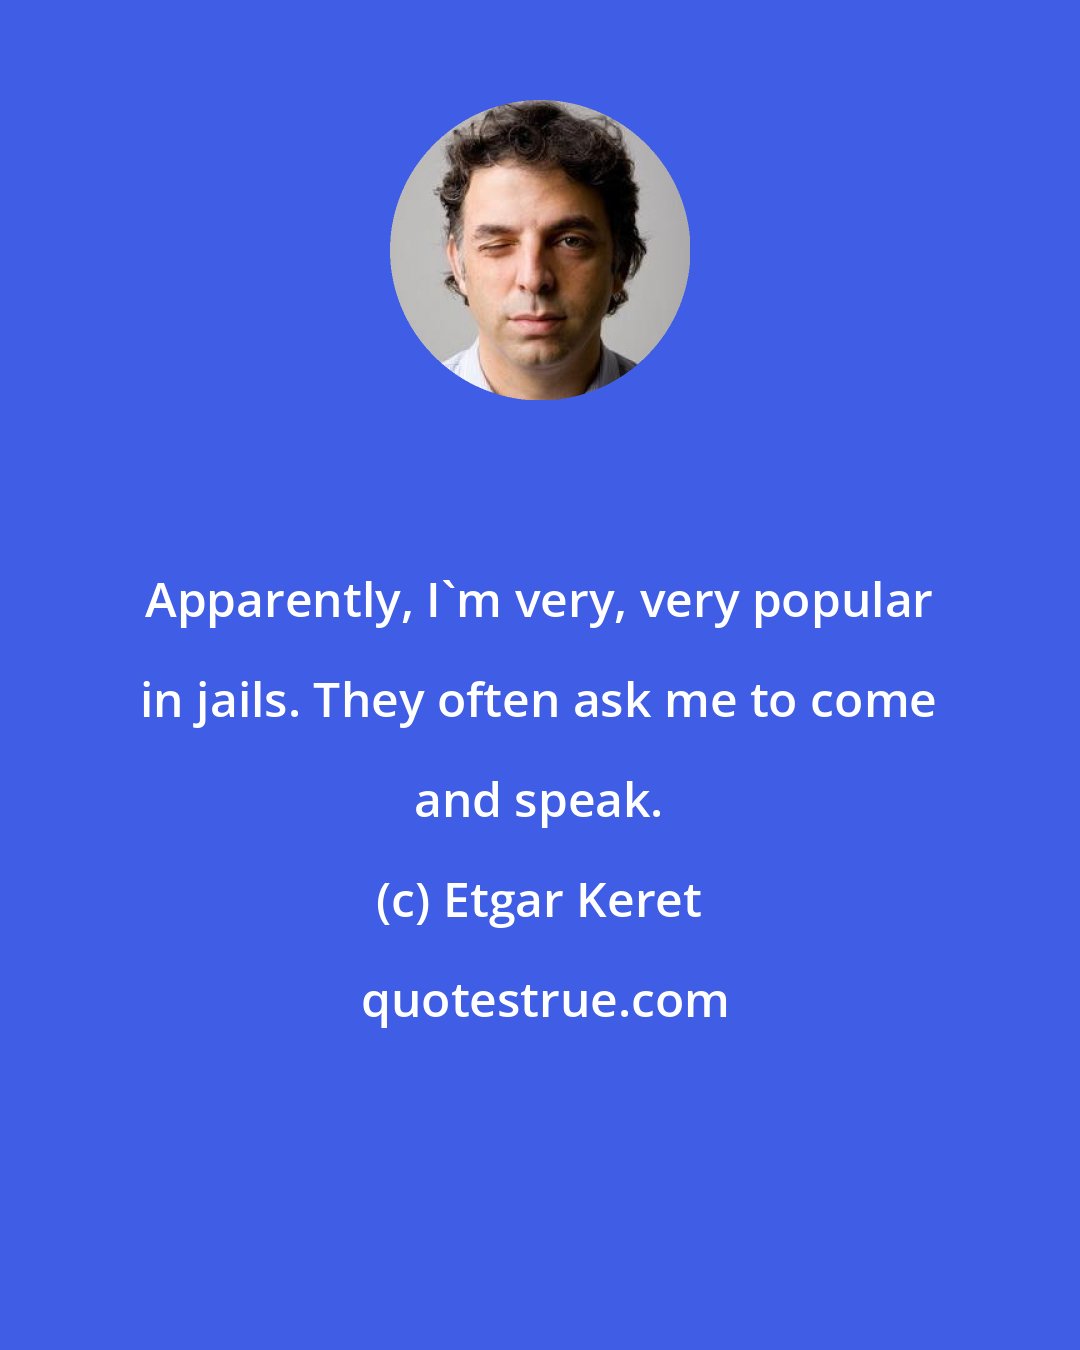 Etgar Keret: Apparently, I'm very, very popular in jails. They often ask me to come and speak.